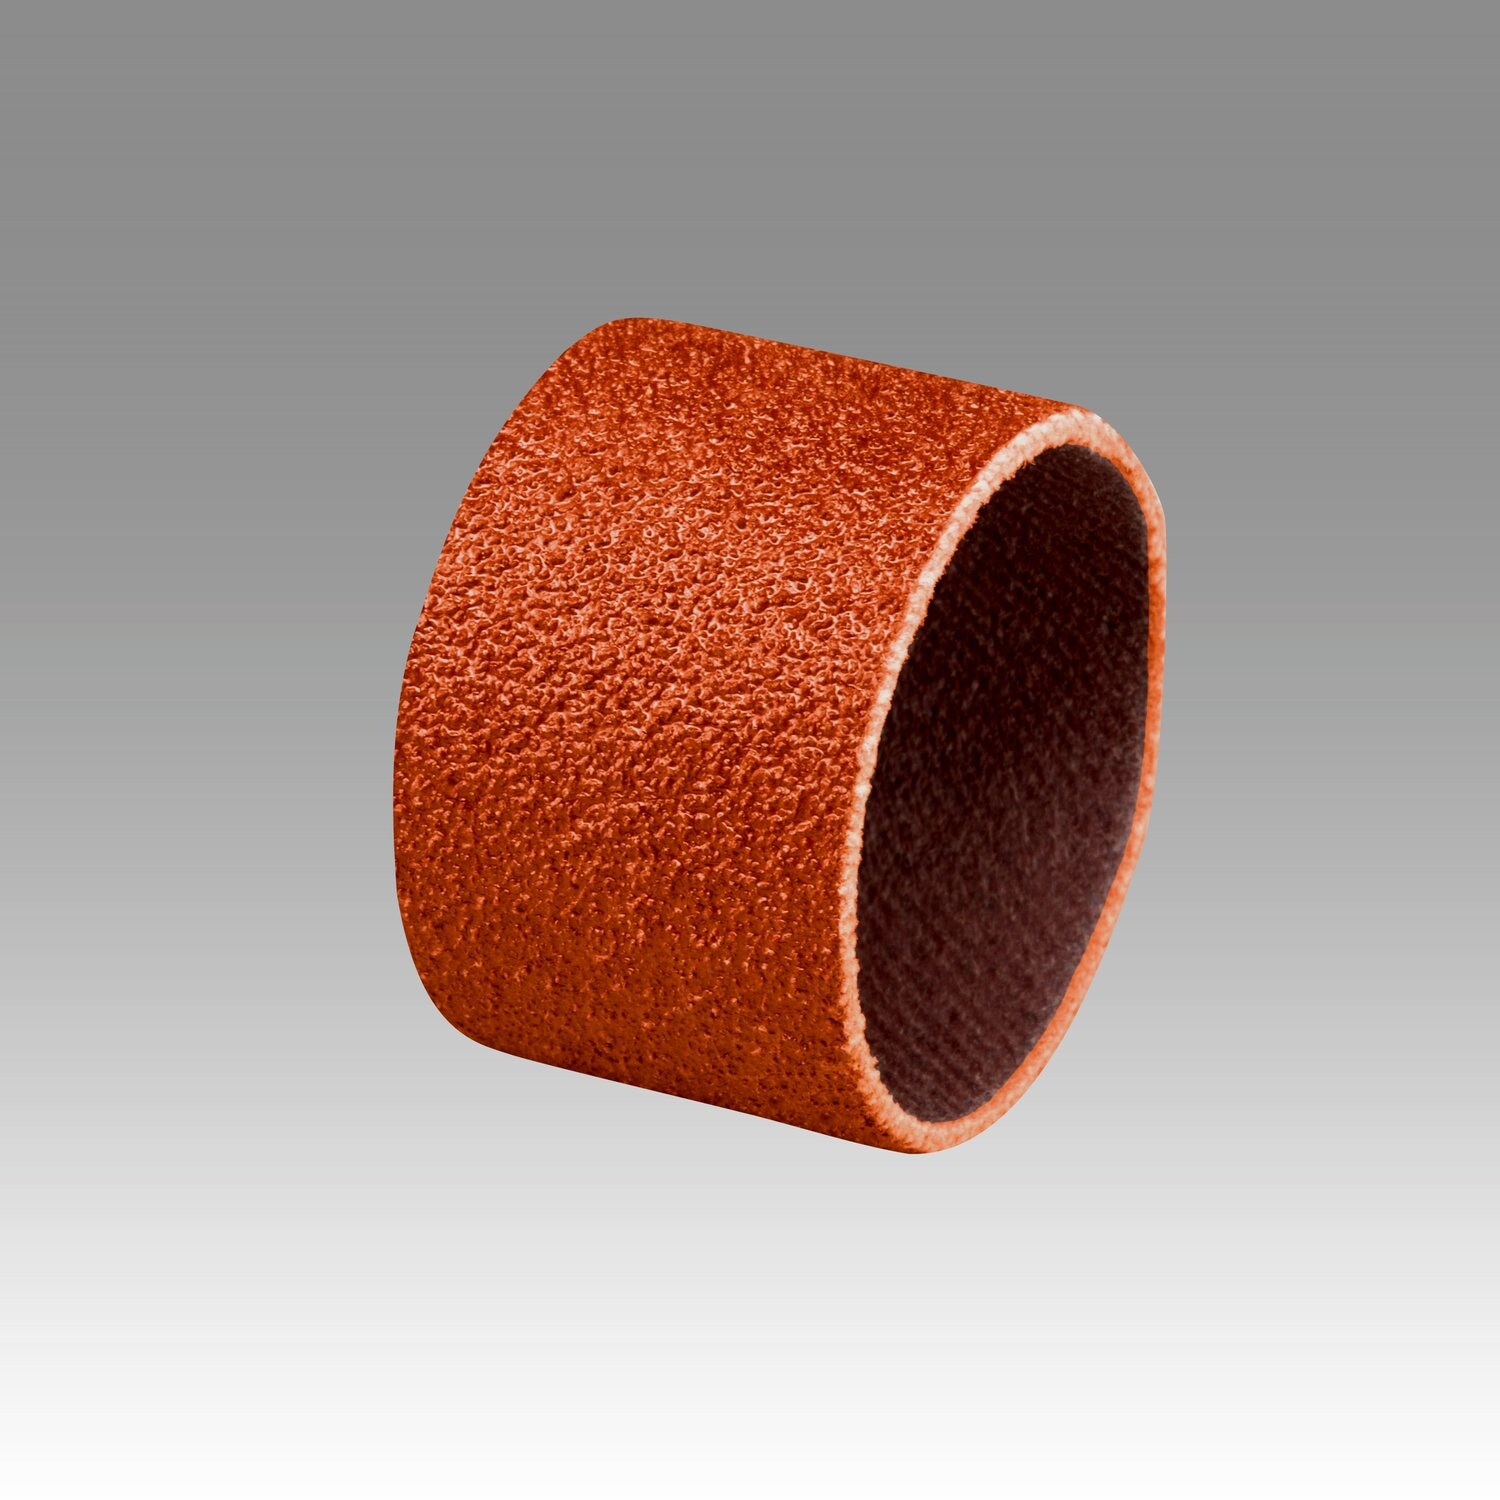 7010508166 - 3M Cloth Band 341D, P100 X-weight, 1/2 in x 1/2 in